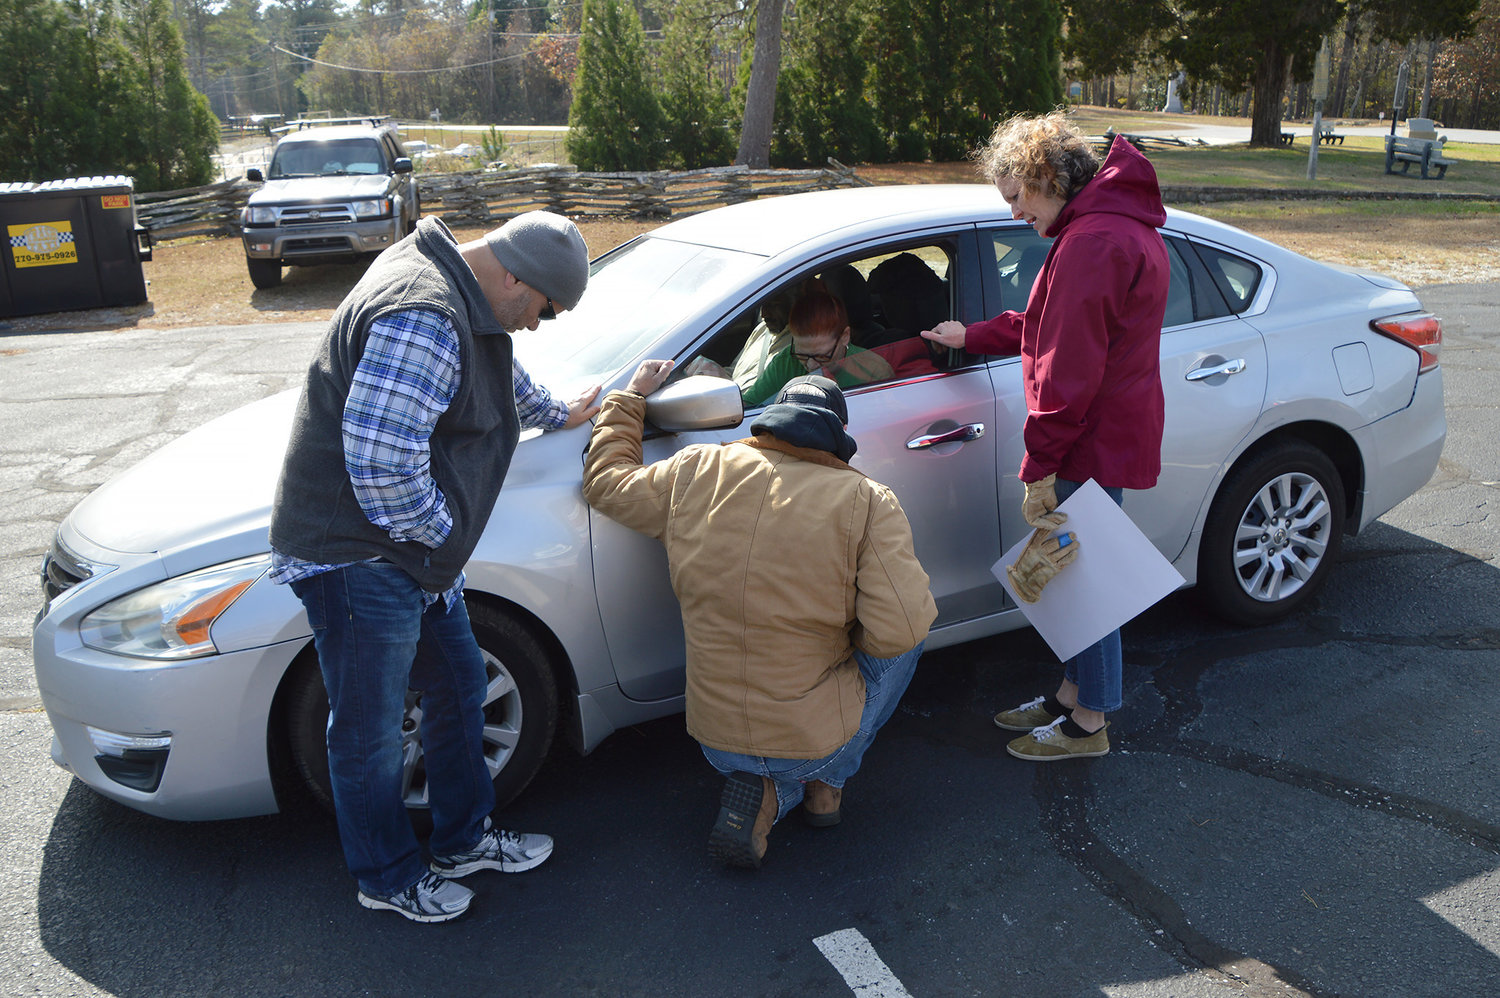 Robert Endicott, Robby Hall and Debbie Lloyd, from left, pray for Erica Mitchell after she pulled into New Hope First Baptist Church on Saturday, Nov. 19, 2022, in Dallas, Ga. Mitchell called the church's drive-up prayer ministry a "great thing."  (Index/Henry Durand)